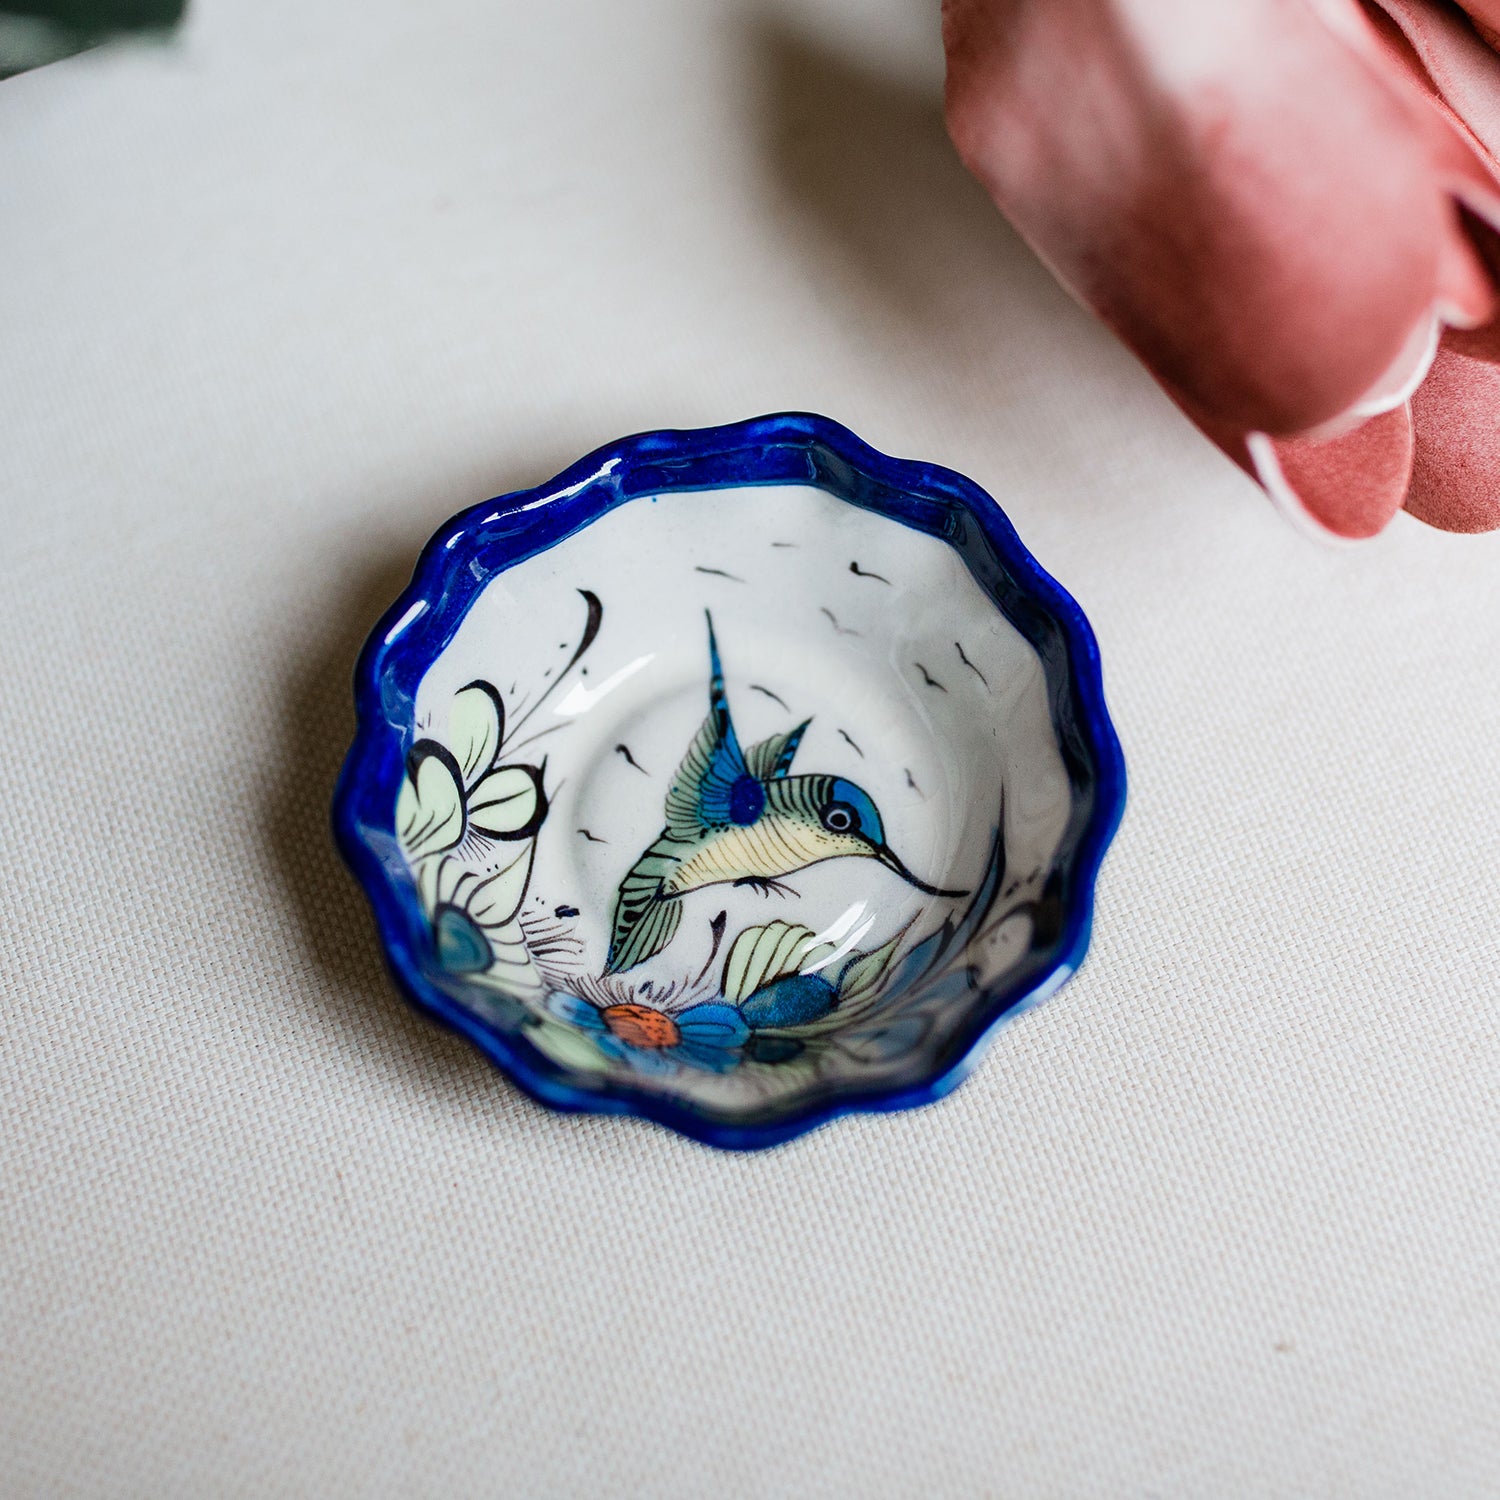 fair trade handmade kitchen accessories gifts for the home shower wedding gift wild bird hand painted jewelry tray earring holder tapas dish wild bird ceramics ethically made